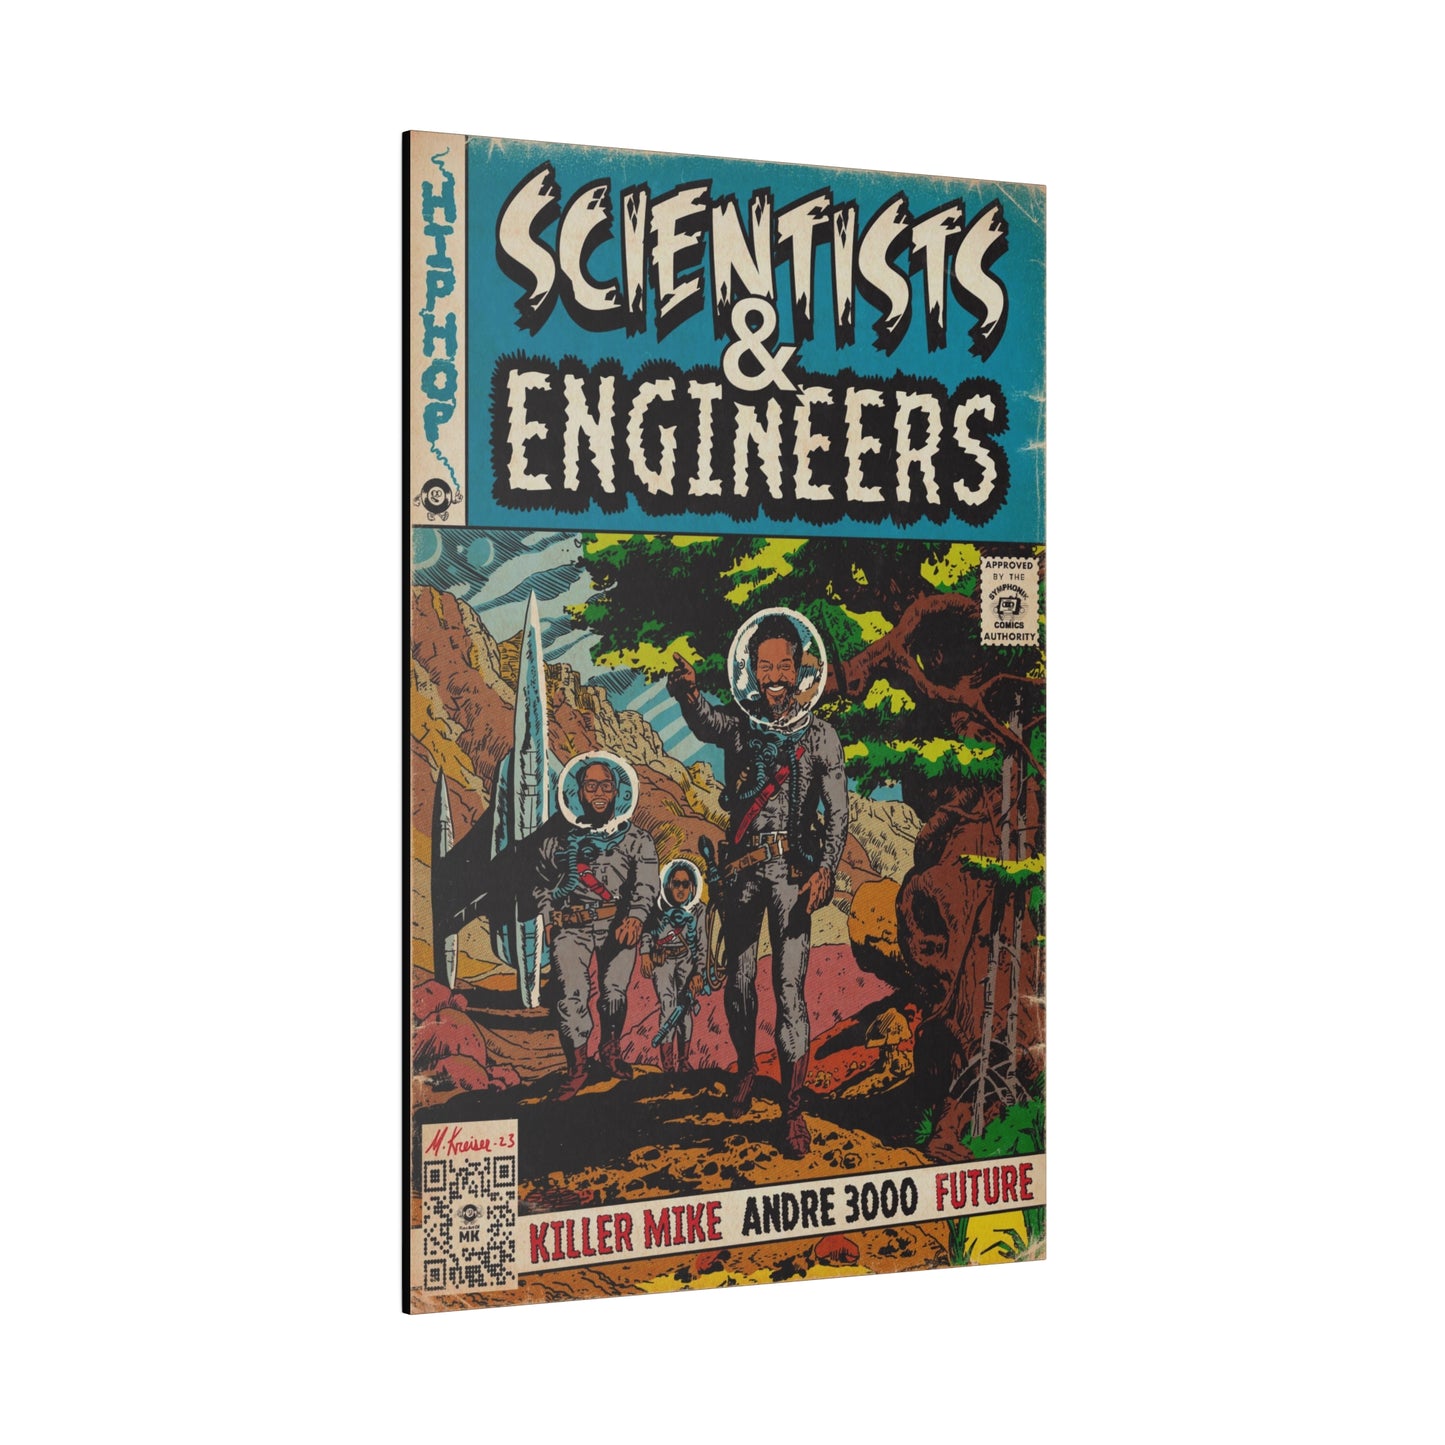 Killer Mike - Scientists & Engineers - Andre 3000 - Future - Matte Canvas, Stretched, 0.75"